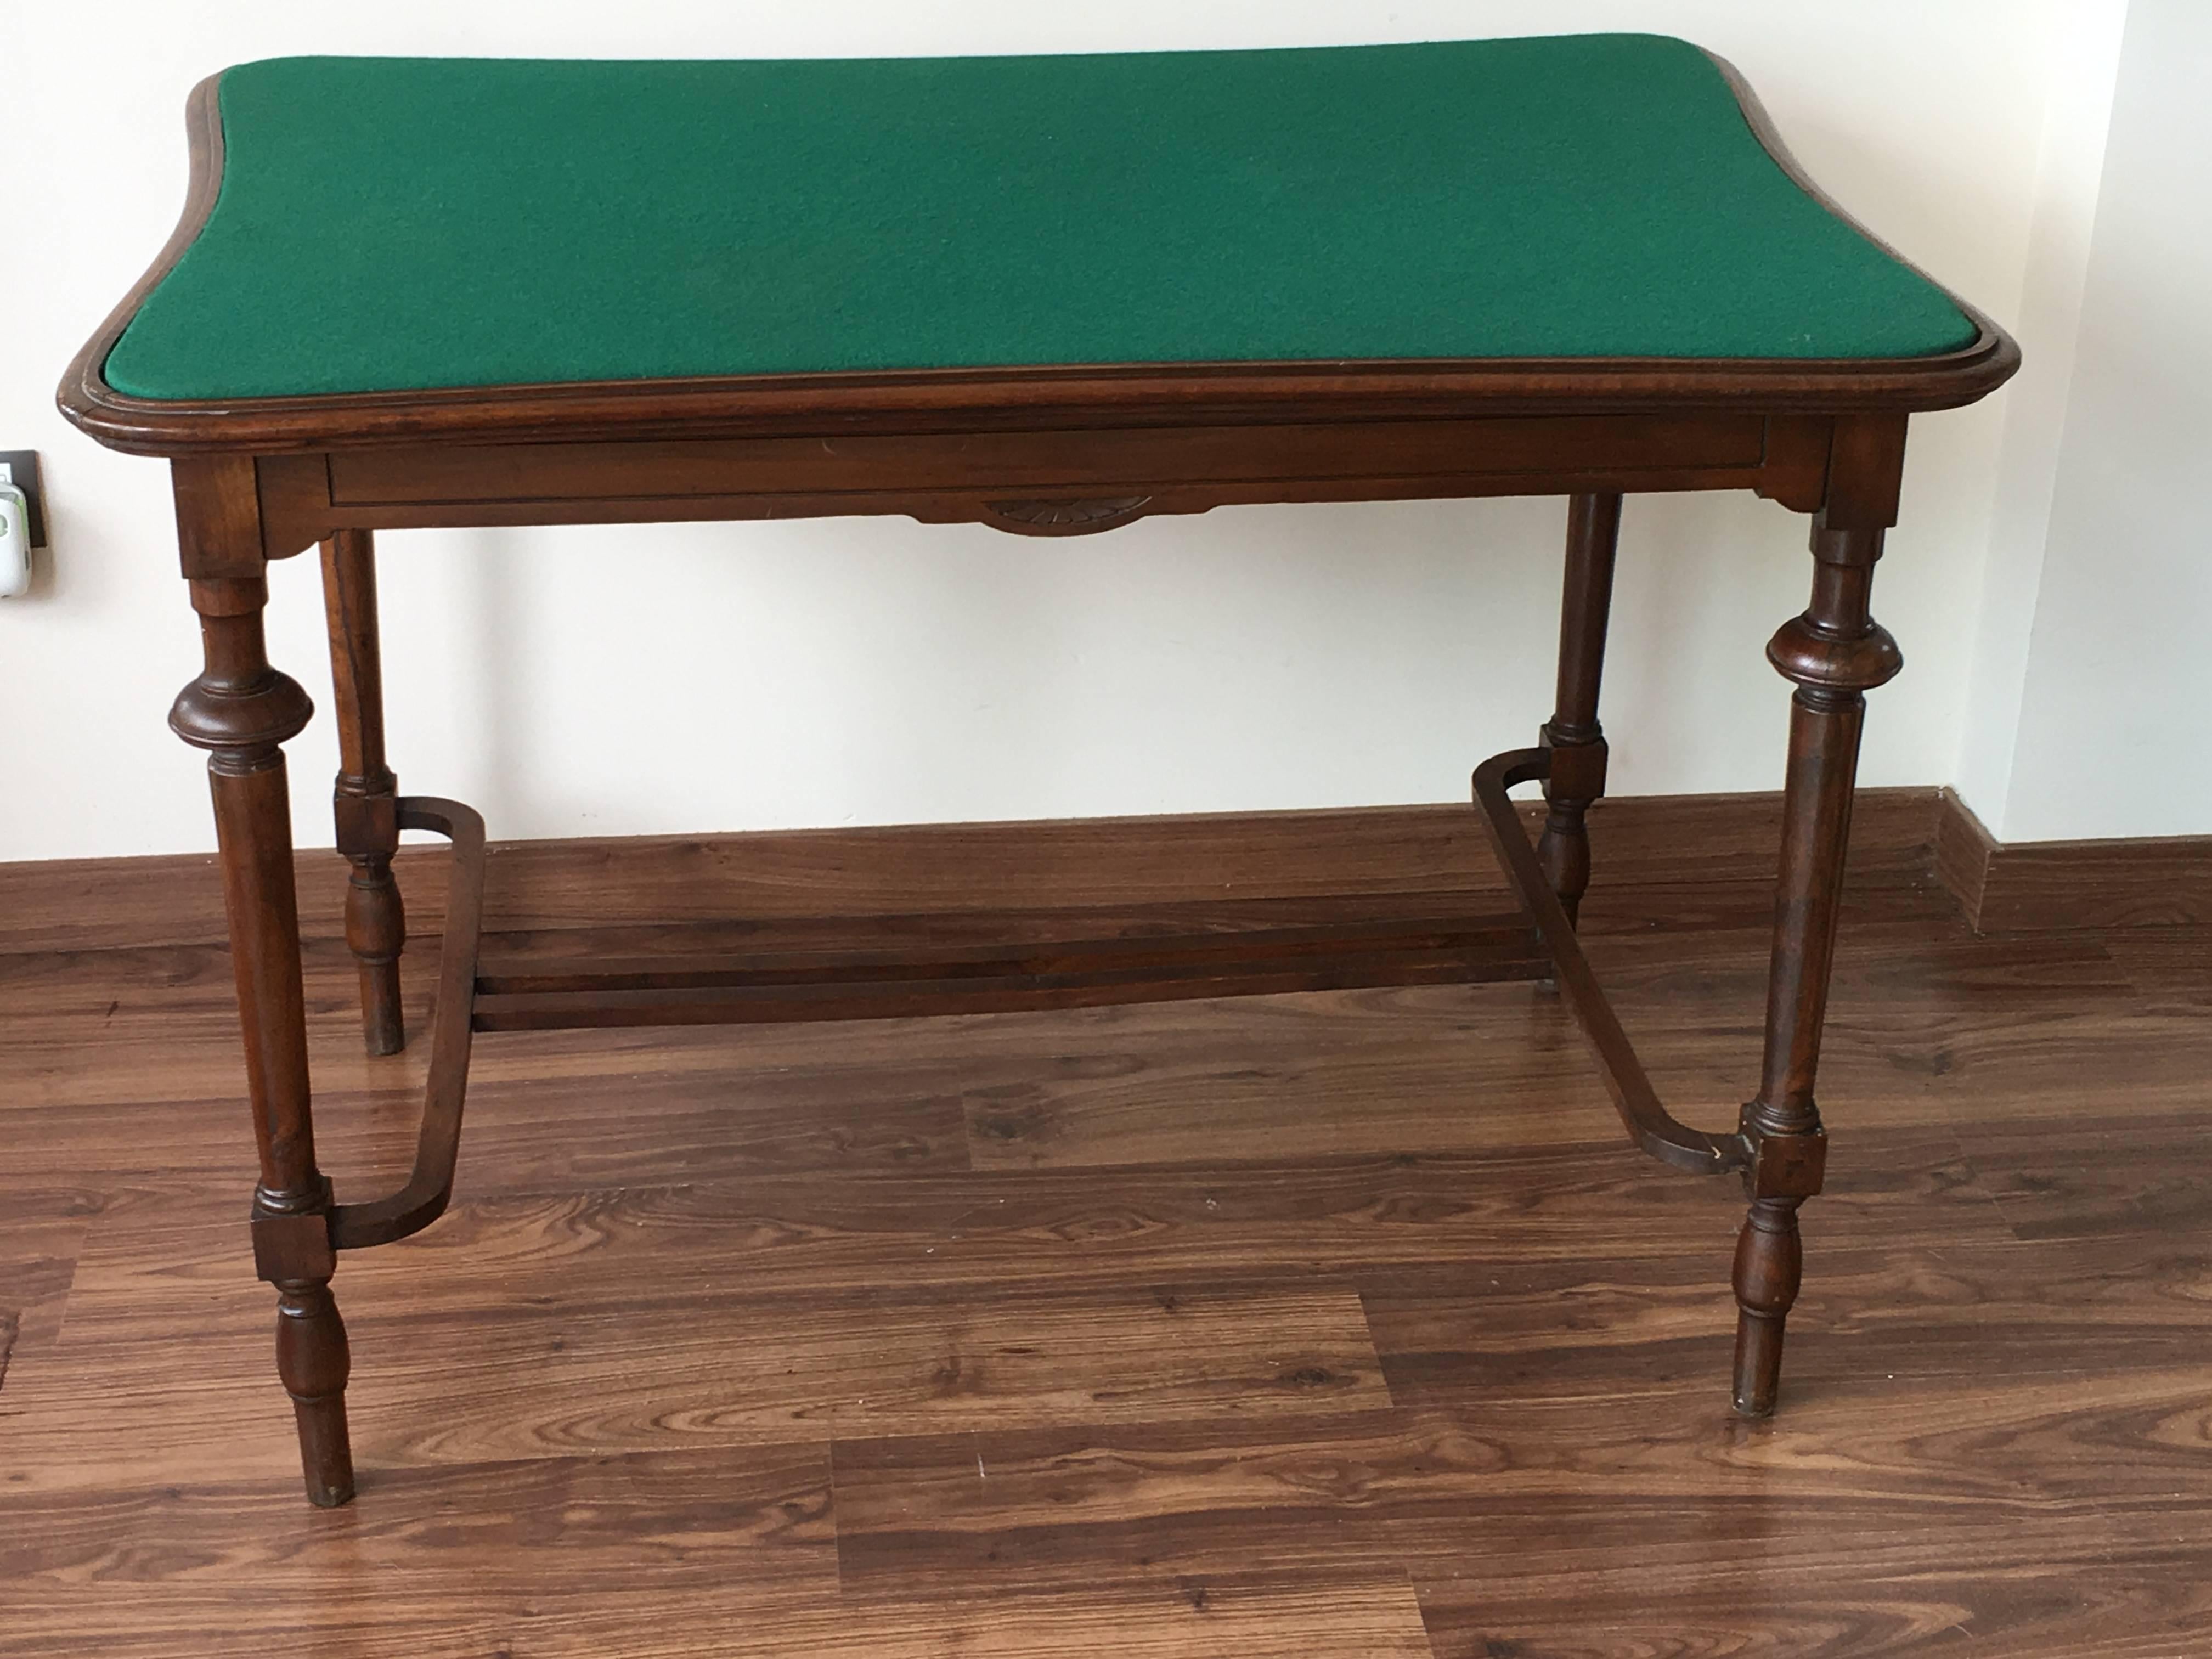 This is a lovely vintage English writing table, circa 1930 in date.
In excellent condition, please see photos for confirmation.
 